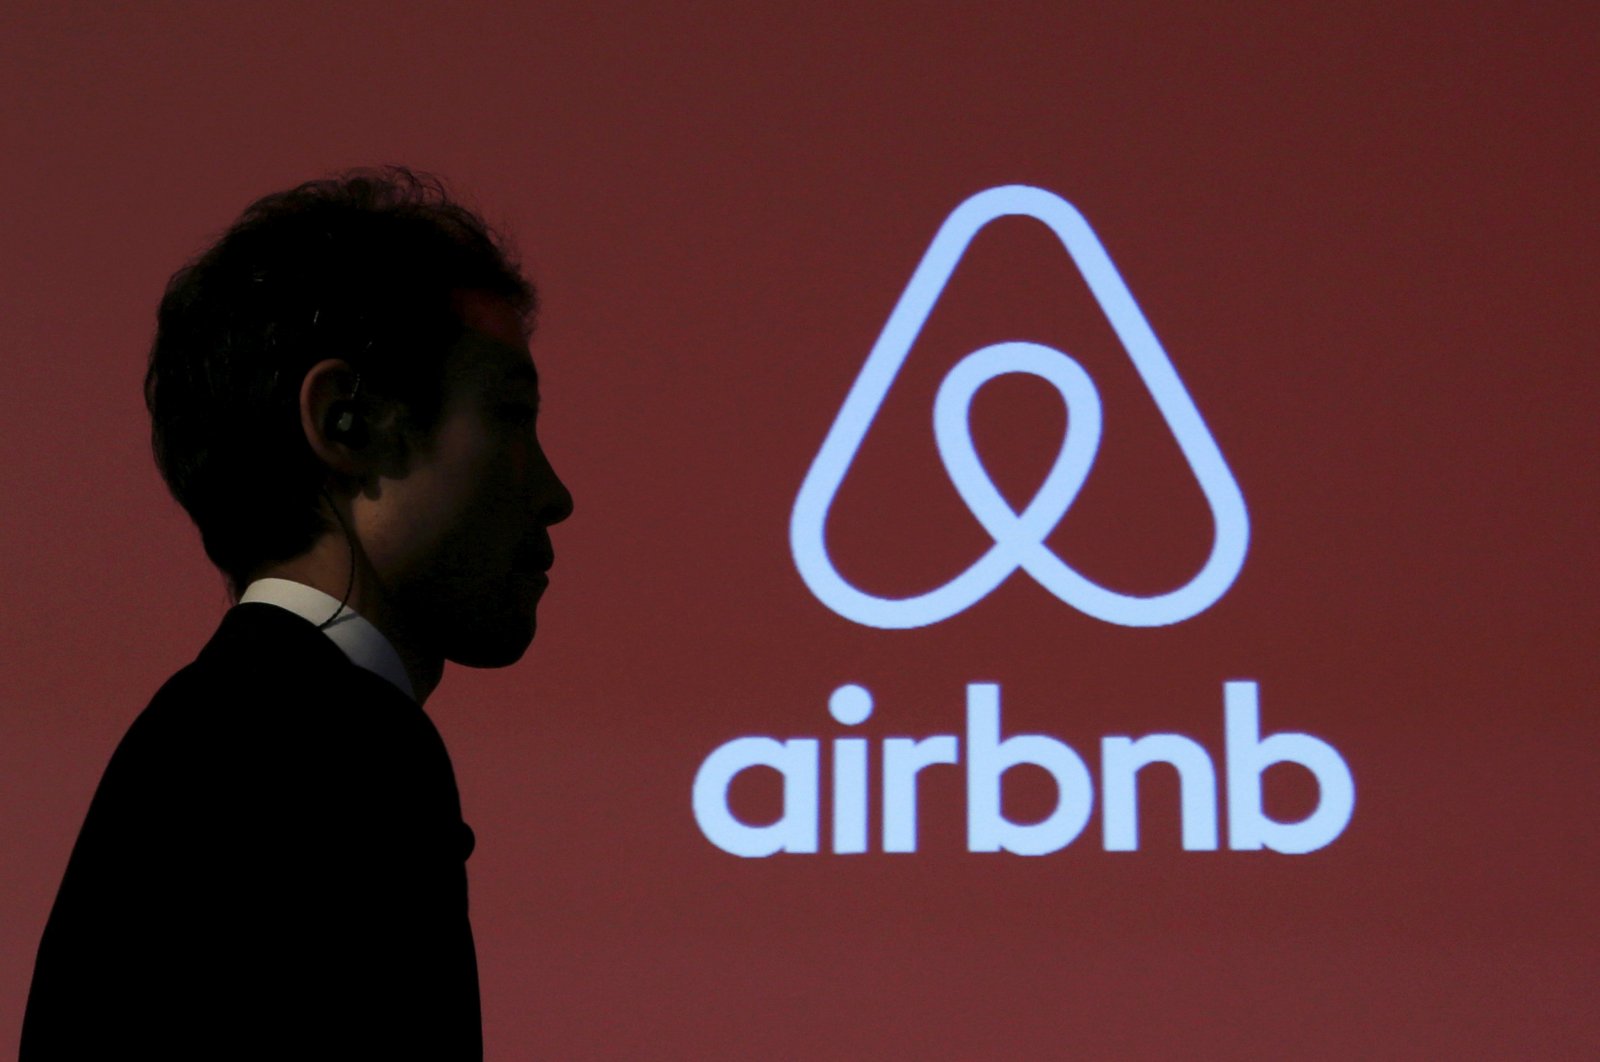 A man walks past a logo of Airbnb after a news conference in Tokyo, Japan, Nov. 26, 2015. (REUTERS)